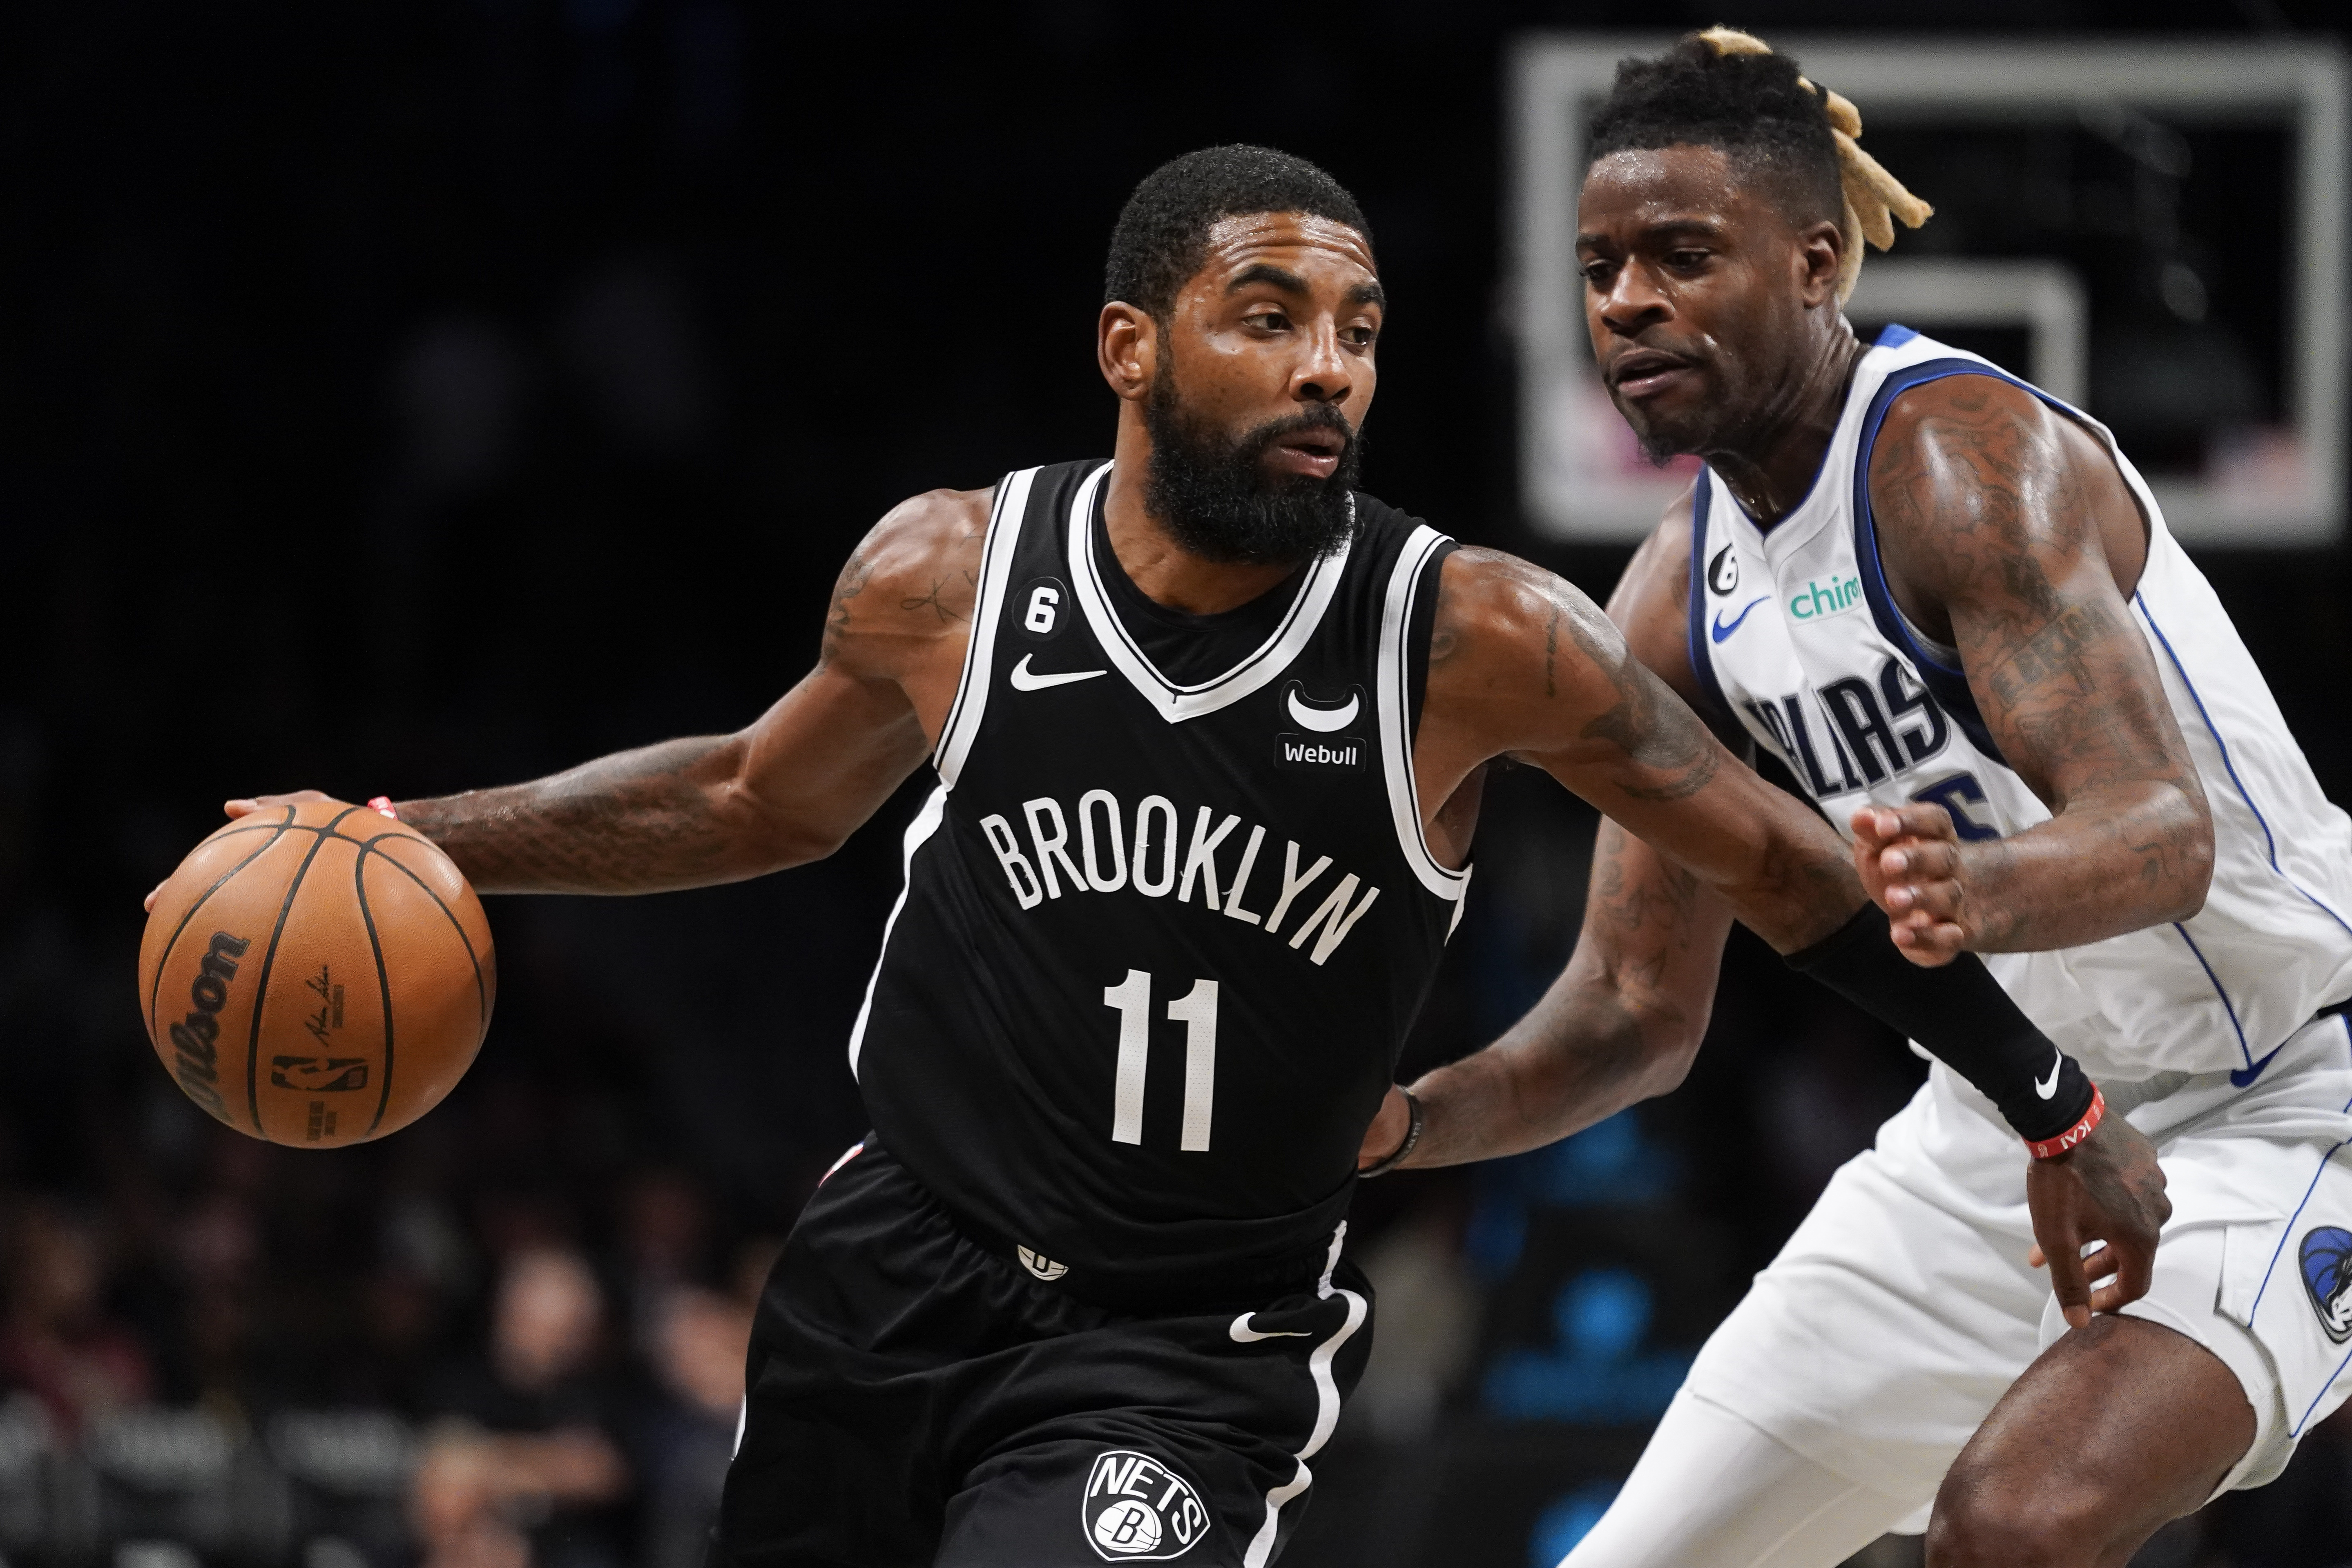 Kyrie Irving agrees to stay with Mavs, Doncic on a $126 million, 3-year  deal, AP source says – KGET 17